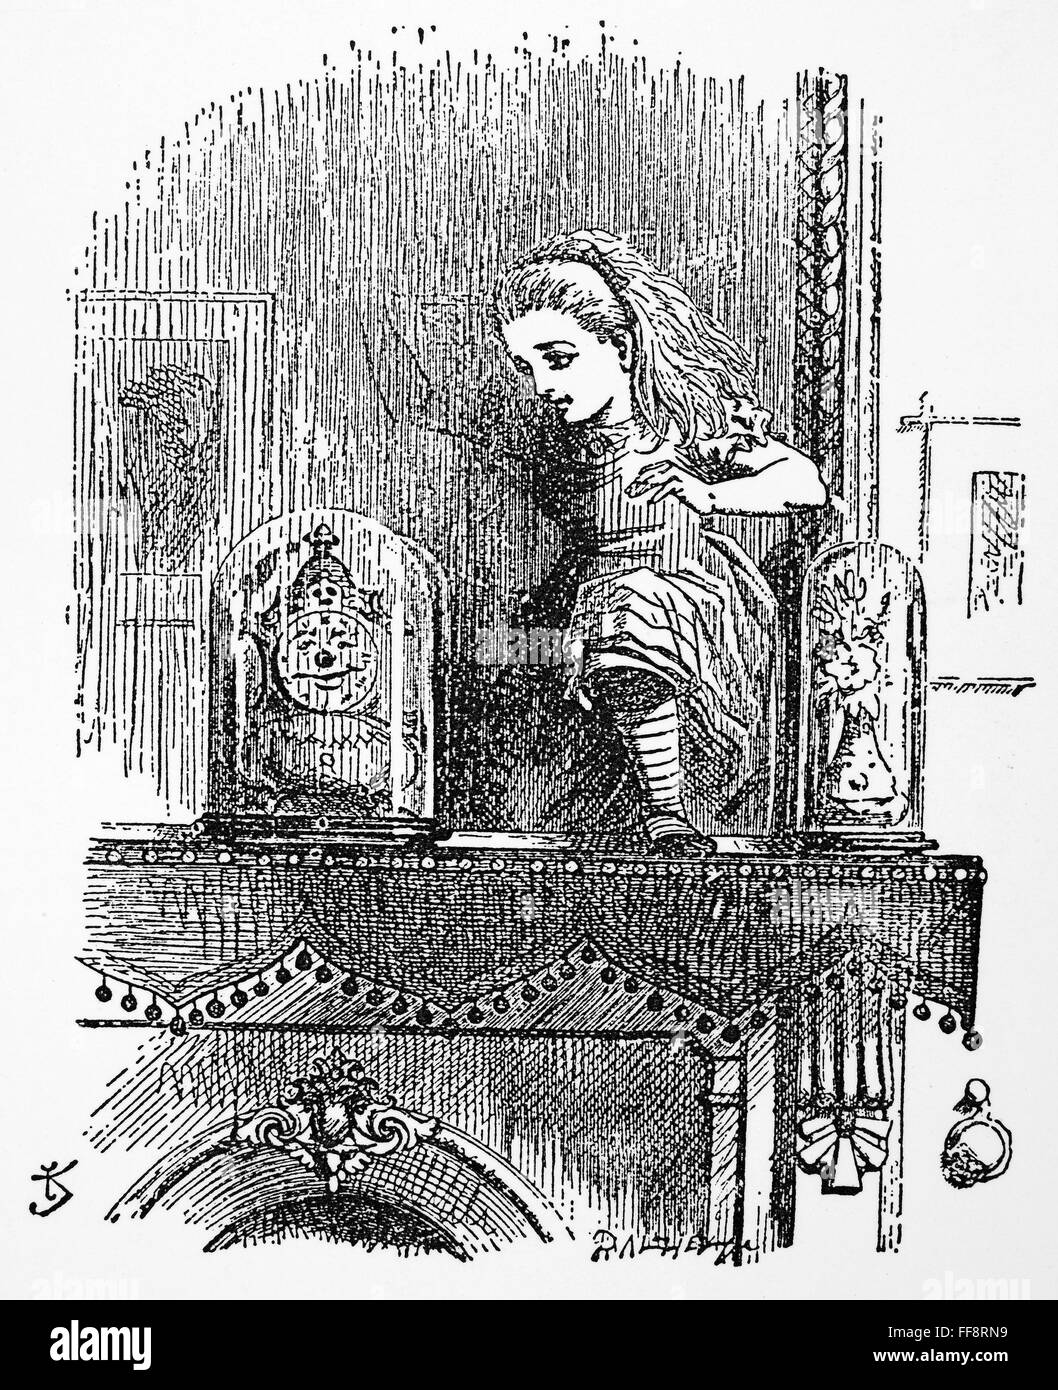 CARROLL: LOOKING GLASS. /nAlice entering the Looking-Glass. Illustration by John Tenniel from the first edition of Lewis Carroll's 'Through the Looking Glass,' 1872. Stock Photo